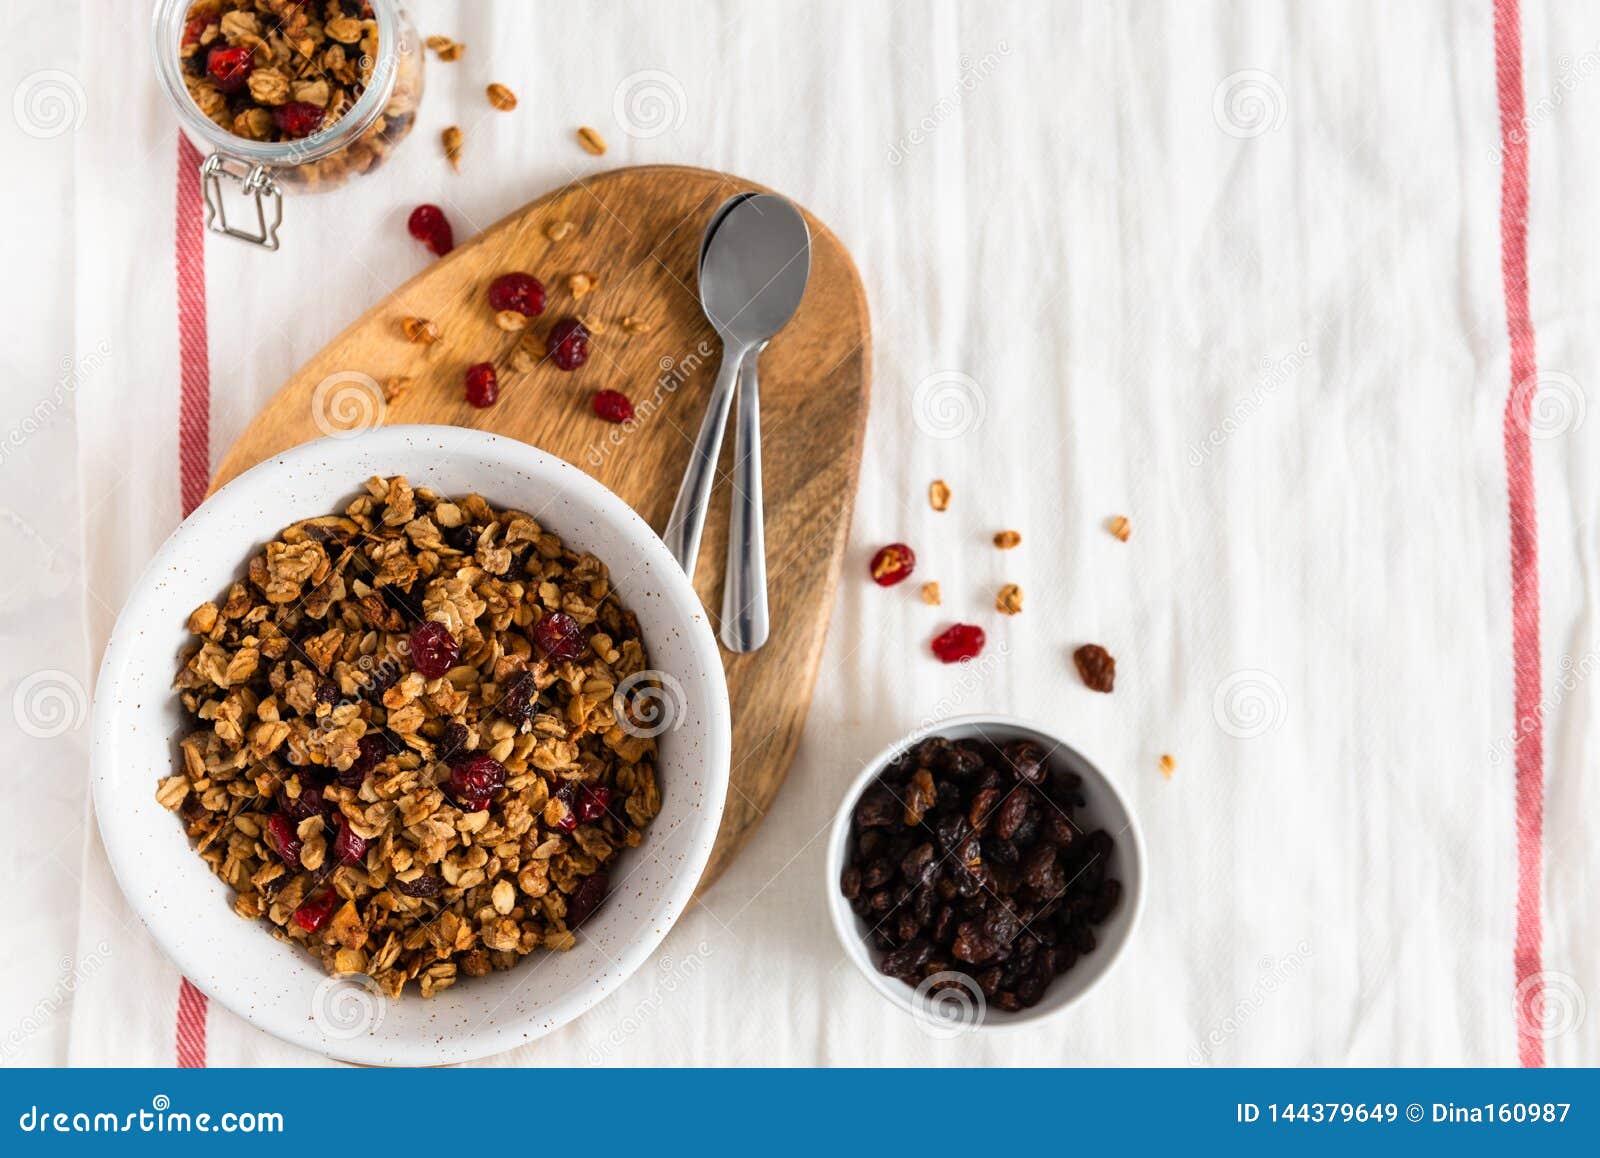 Bowl of Homemade Granola with Nuts and Fruits on White Linen Background ...